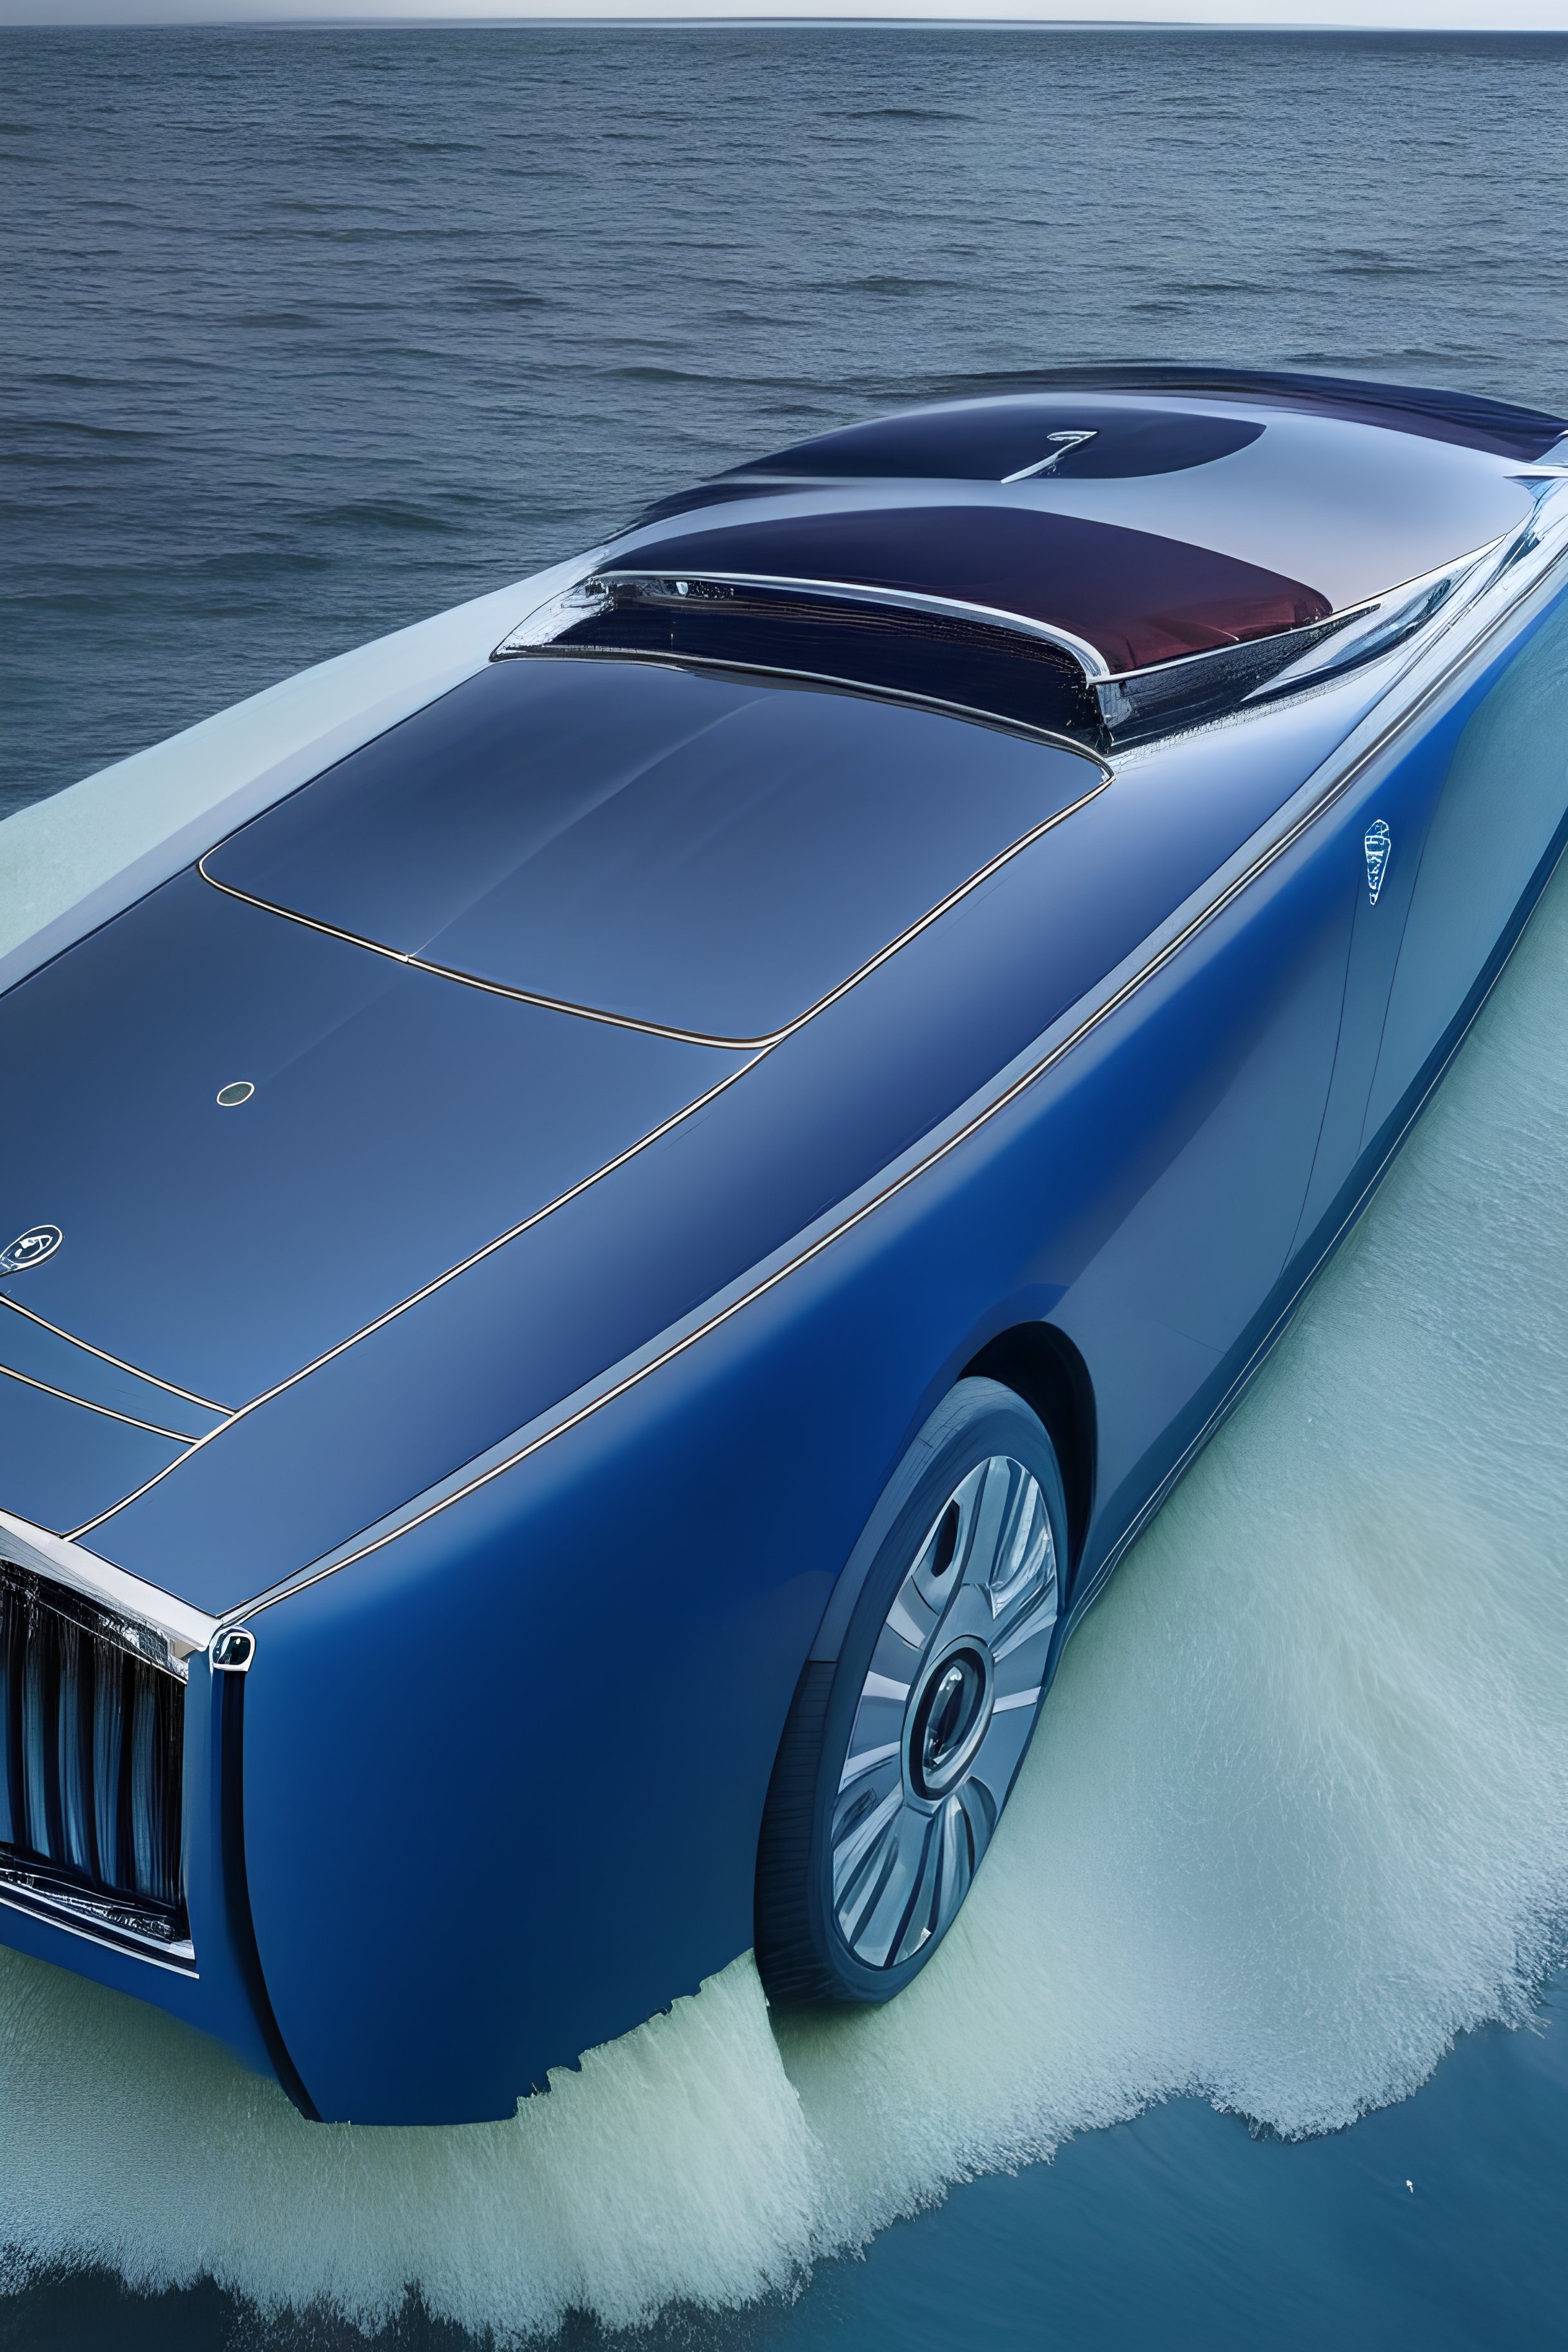 Behold: the new Rolls-Royce Boat Tail